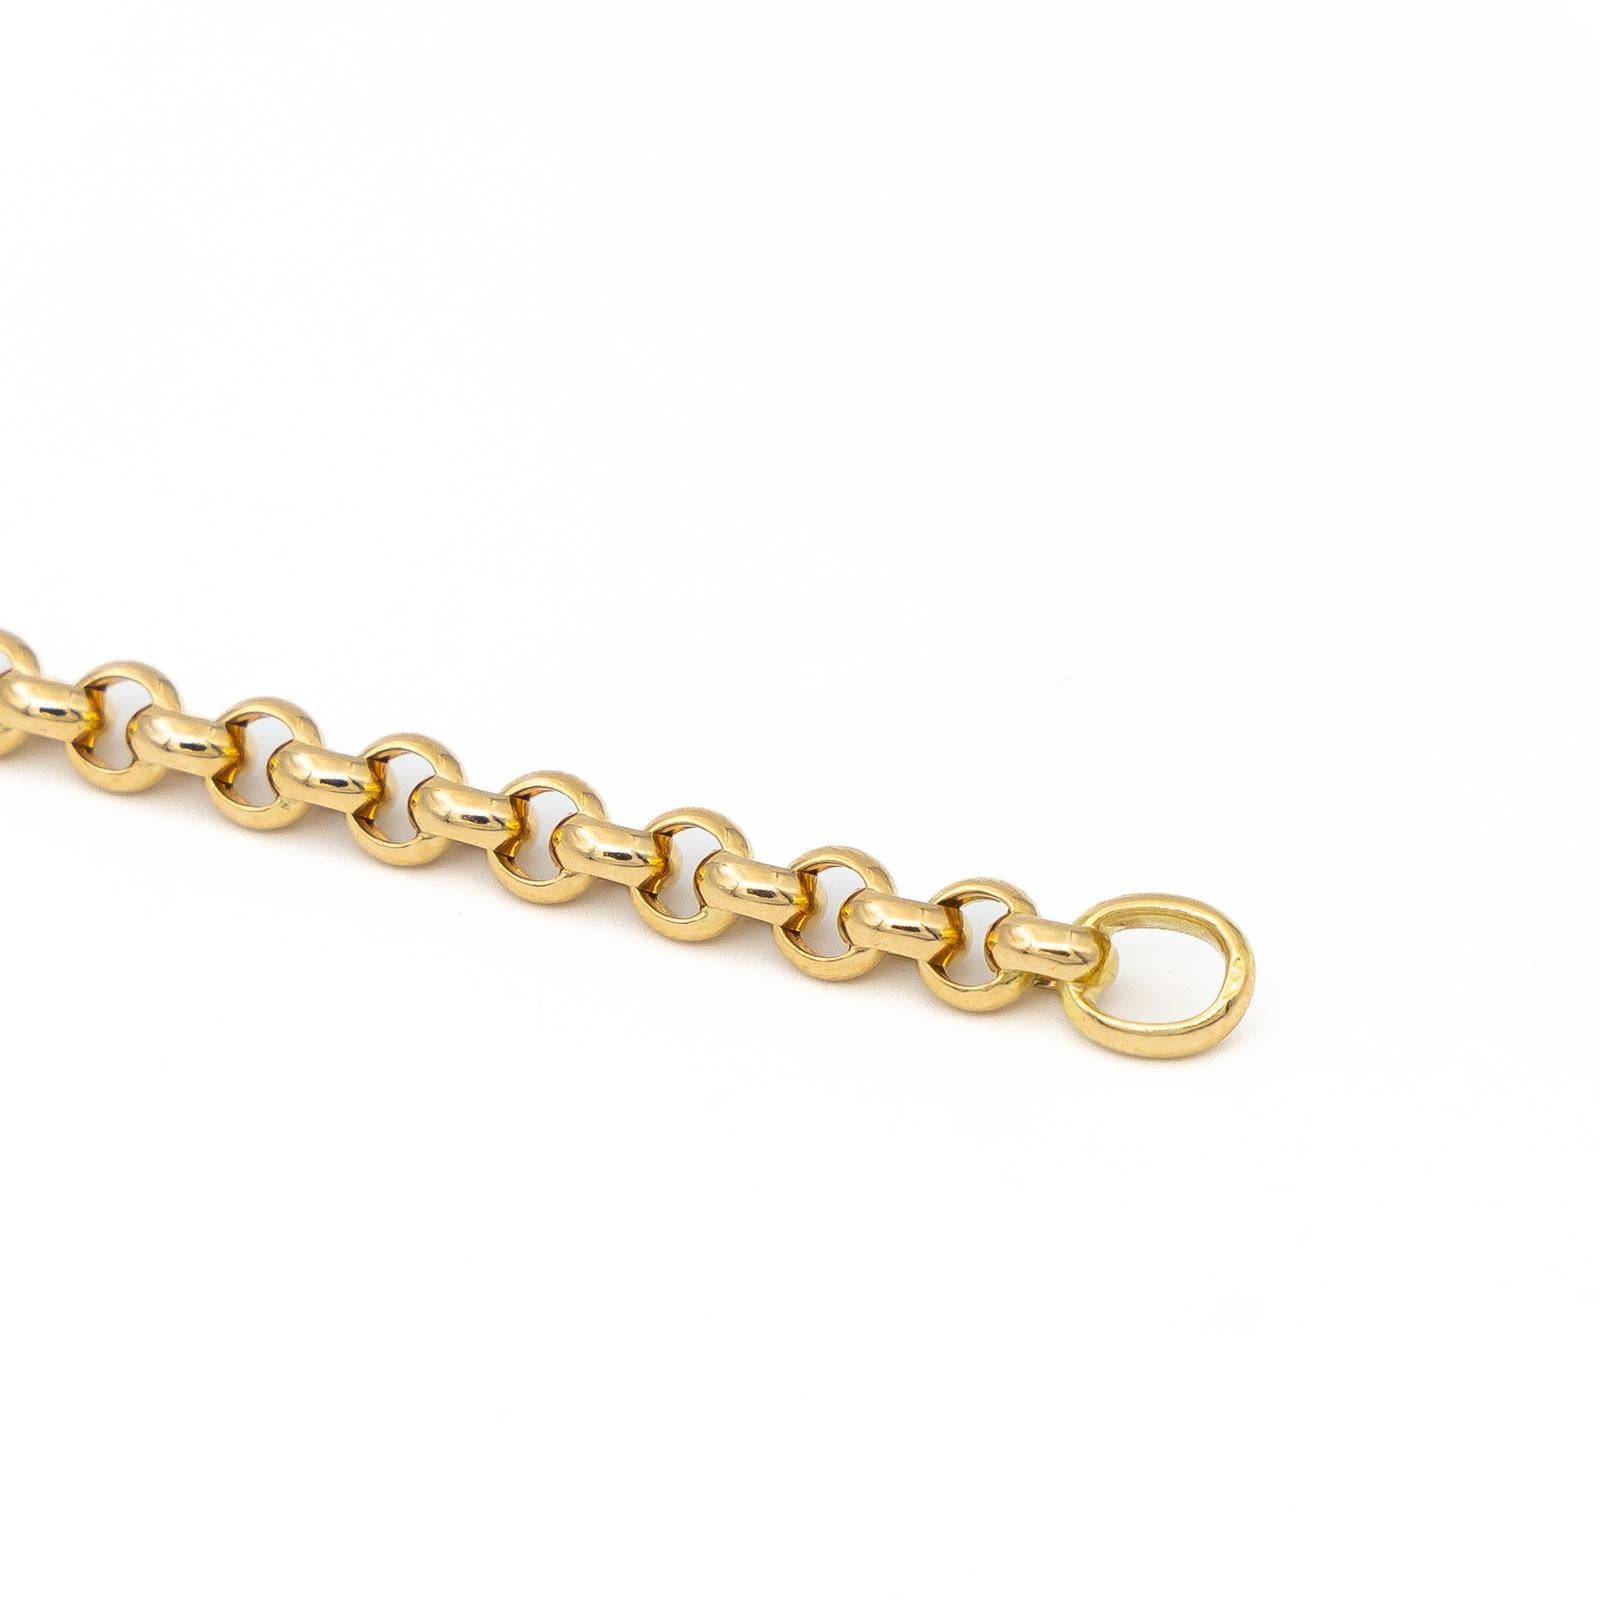 Women's Chain and Pendant Signed by Chopard in Yellow Gold 750 Thousandths '18 Carats' For Sale